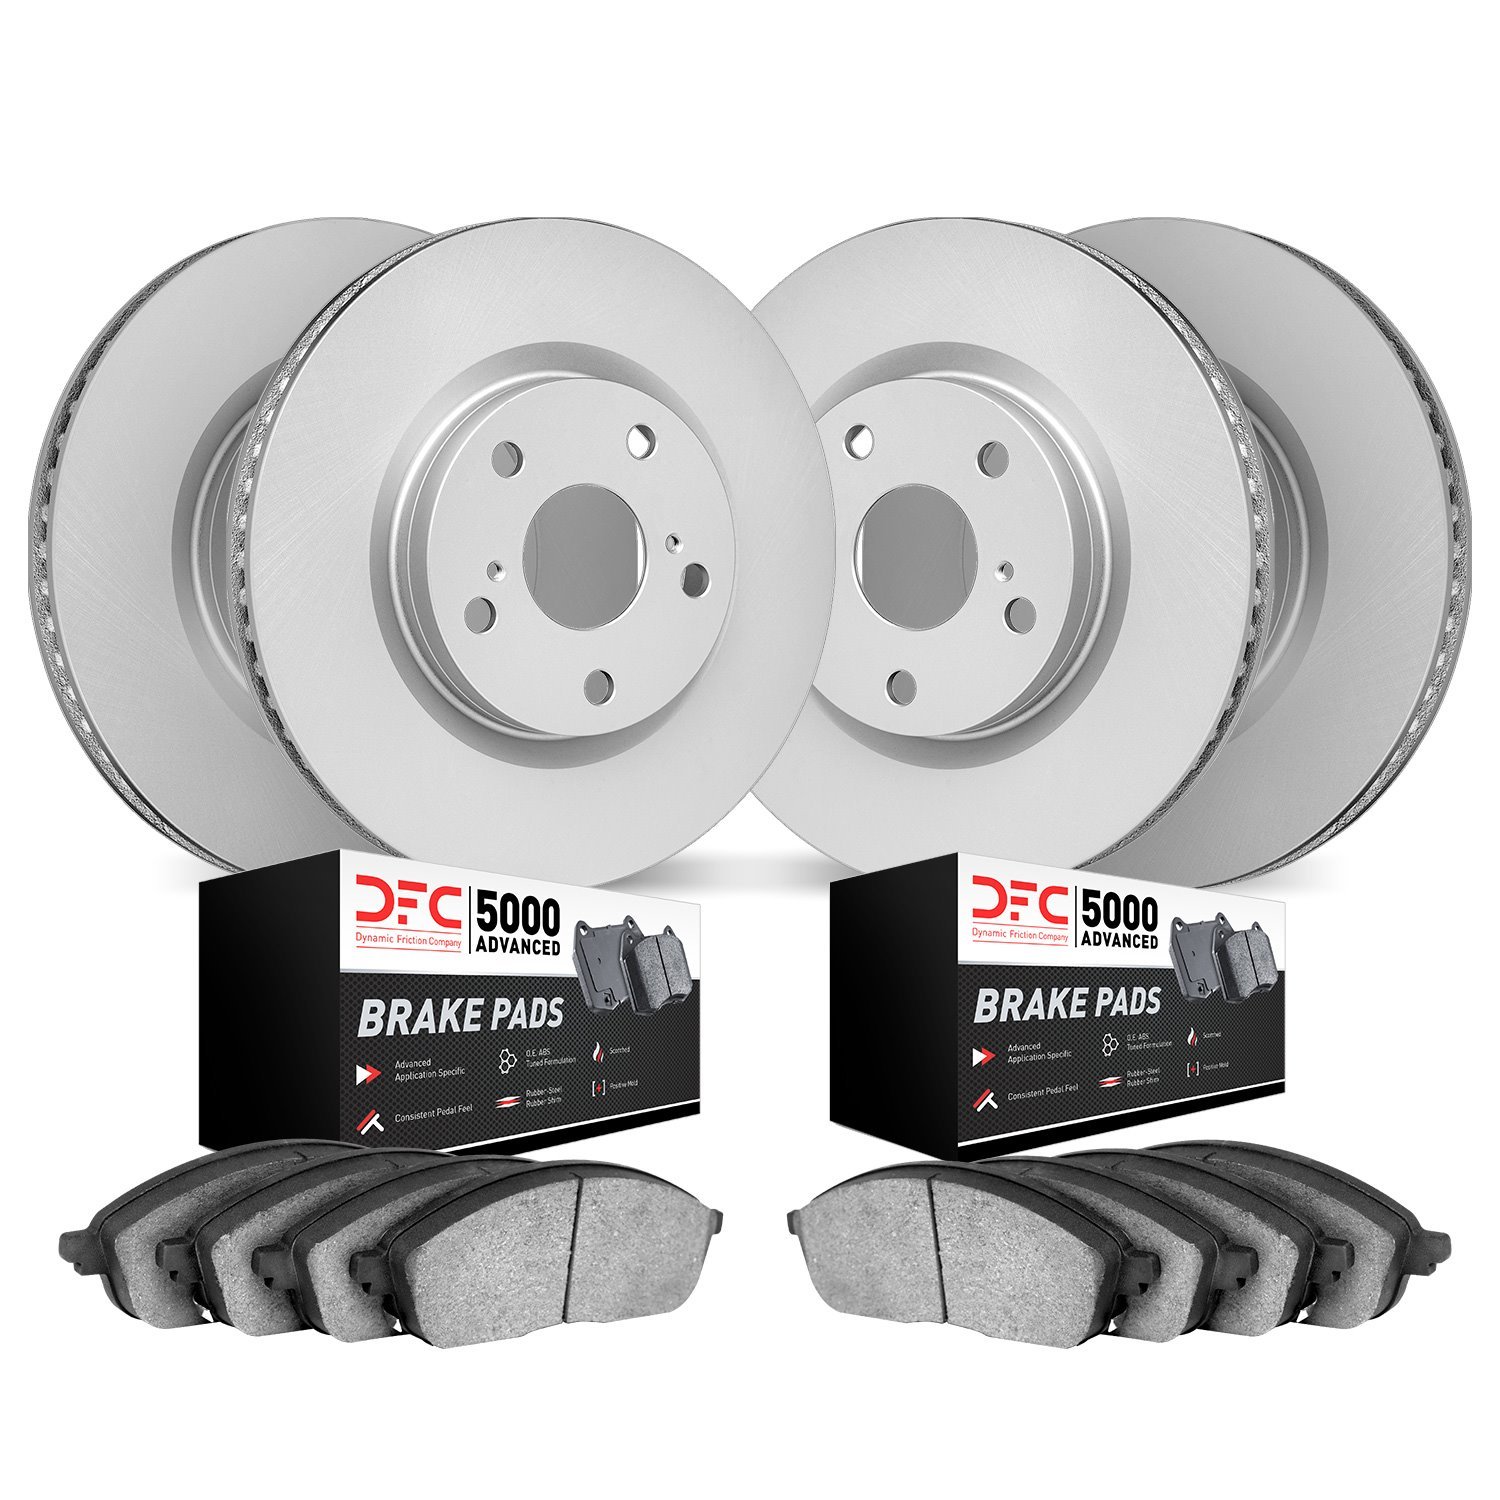 4504-63028 Geospec Brake Rotors w/5000 Advanced Brake Pads Kit, 2003-2004 Mercedes-Benz, Position: Front and Rear